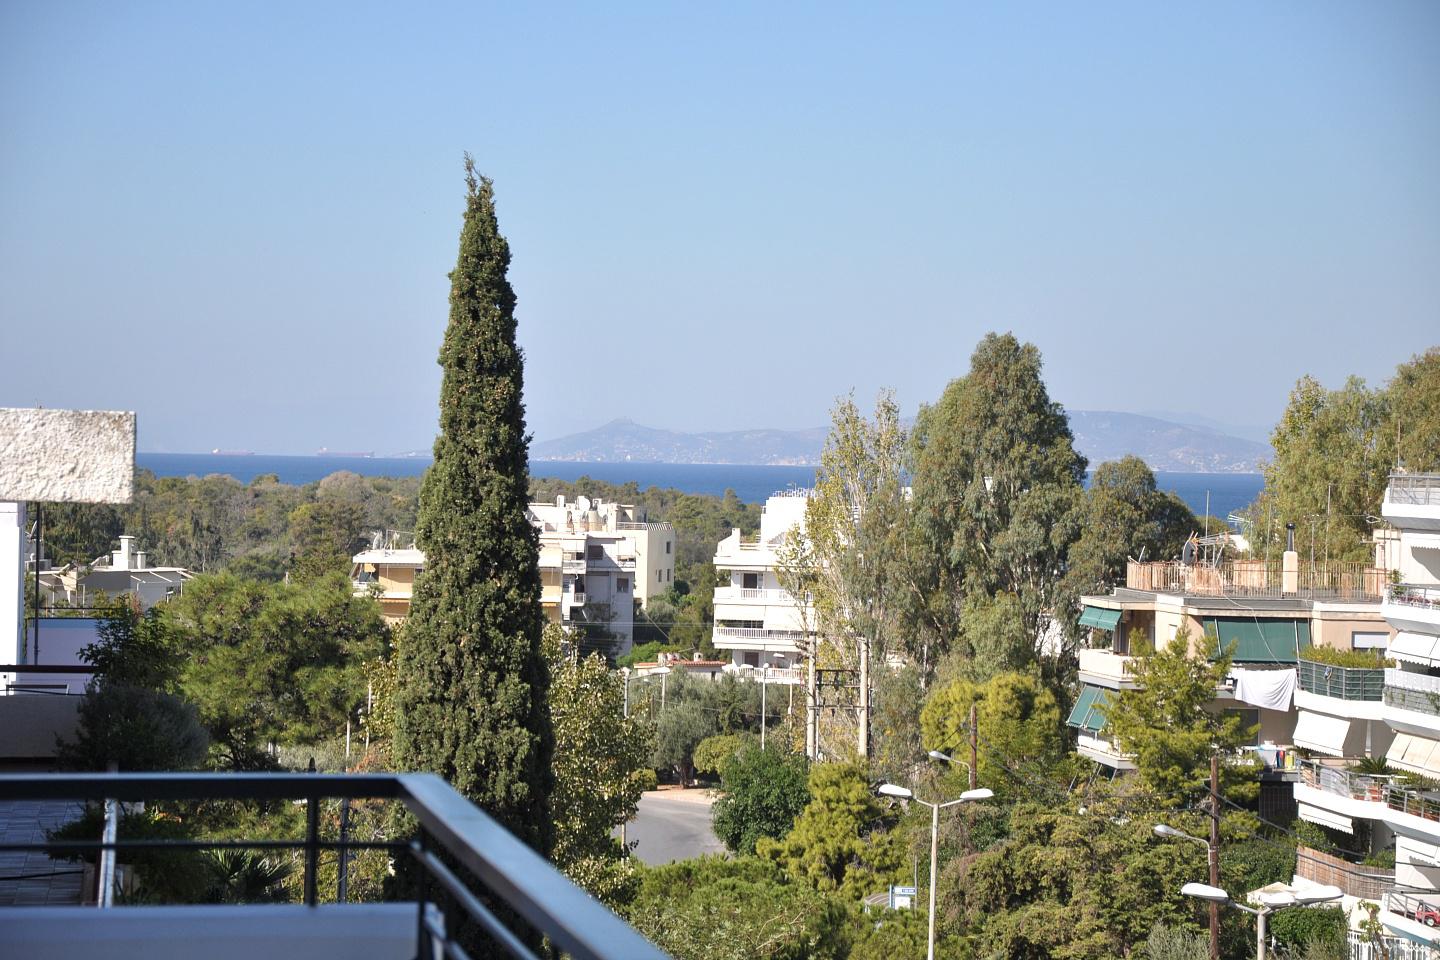 Apartment building for sale in Voula, Athens Greece.